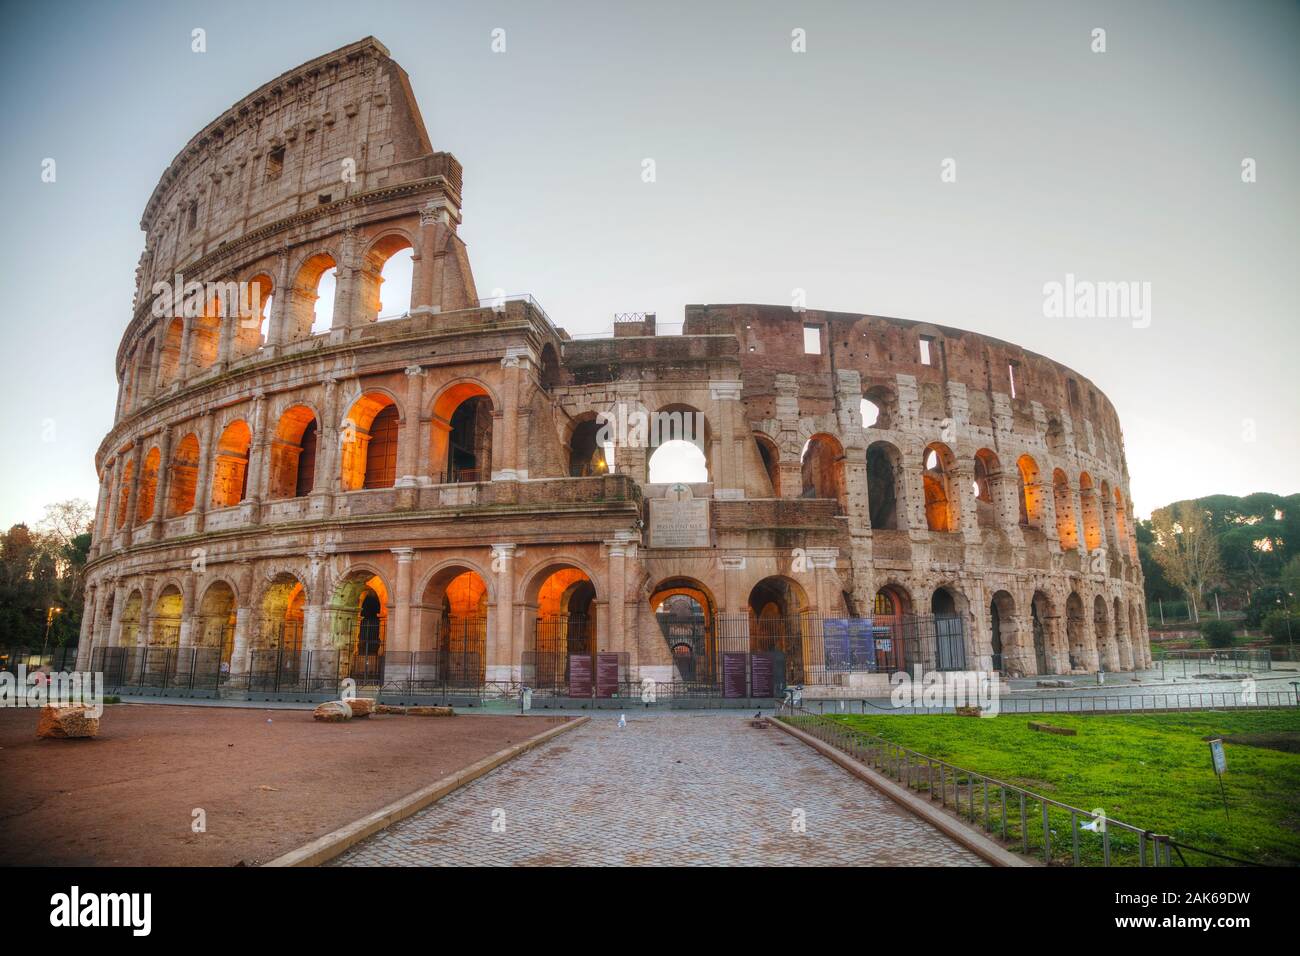 The Colosseum or Flavian Amphitheatre in Rome, Italy early in the morning Stock Photo